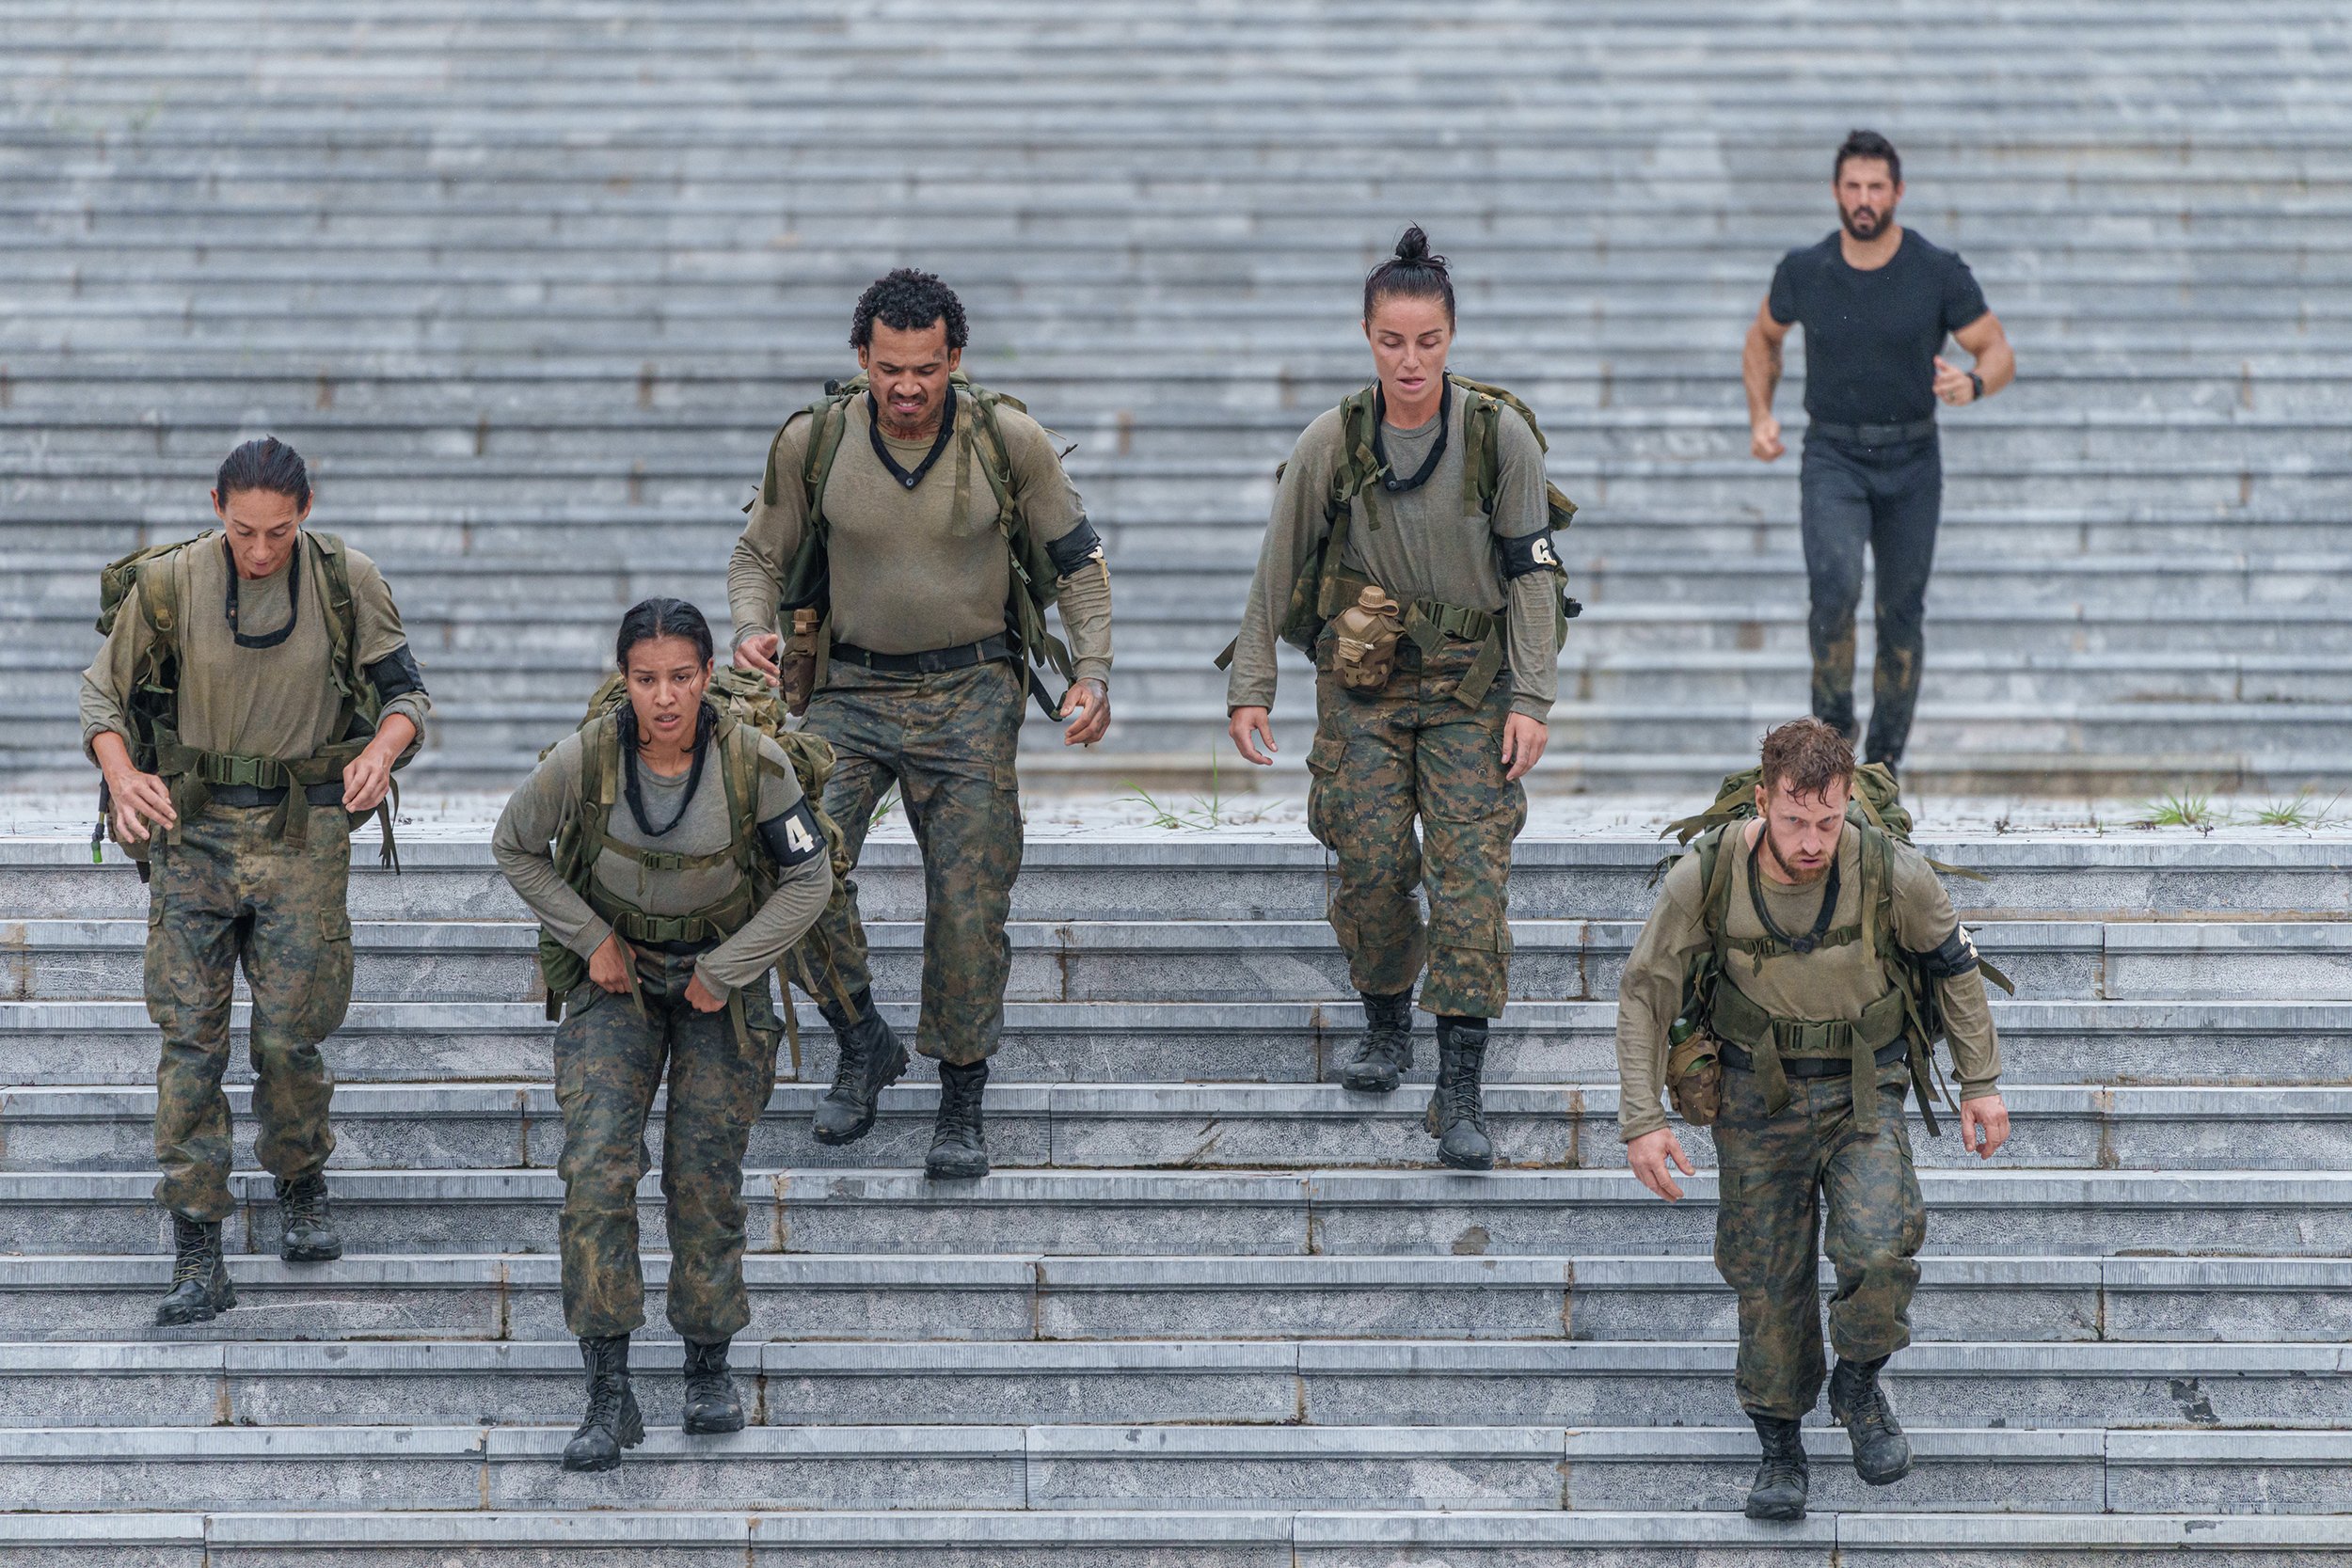  Team Bravo make their way down the temple steps - Ammunition race  Episode 4: Leadership   Minnow Films / Channel 4 